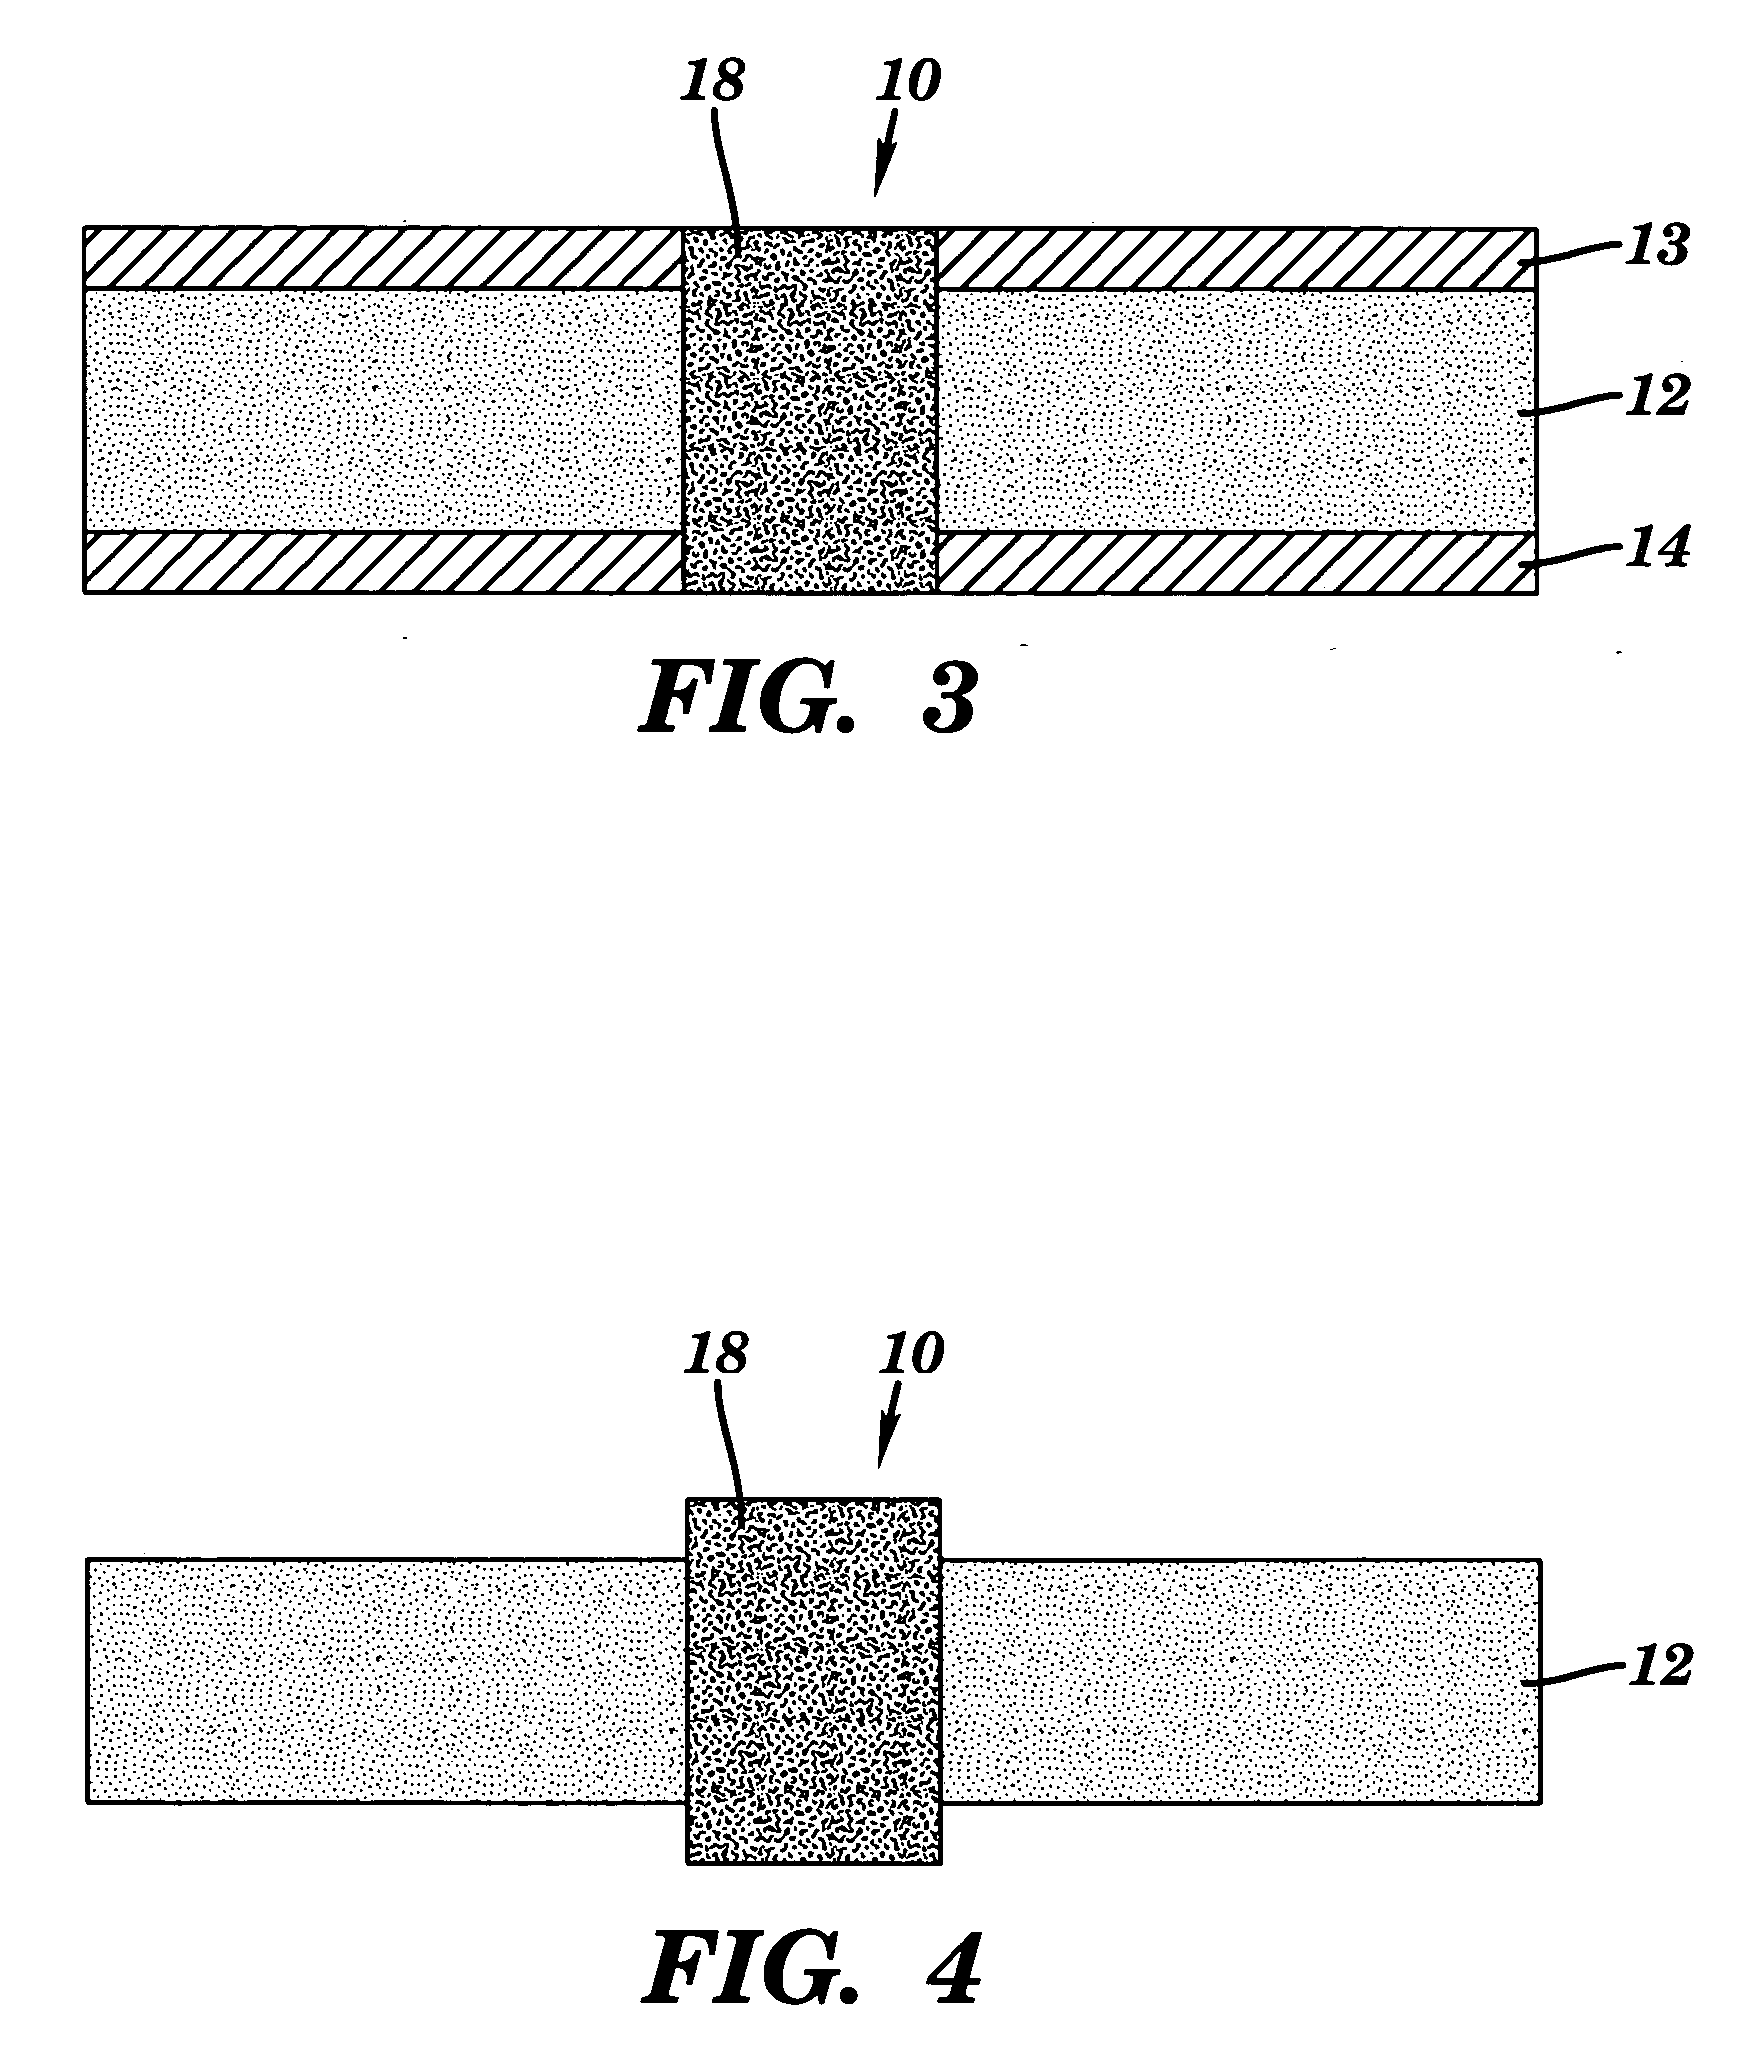 Formation of multisegmented plated through holes